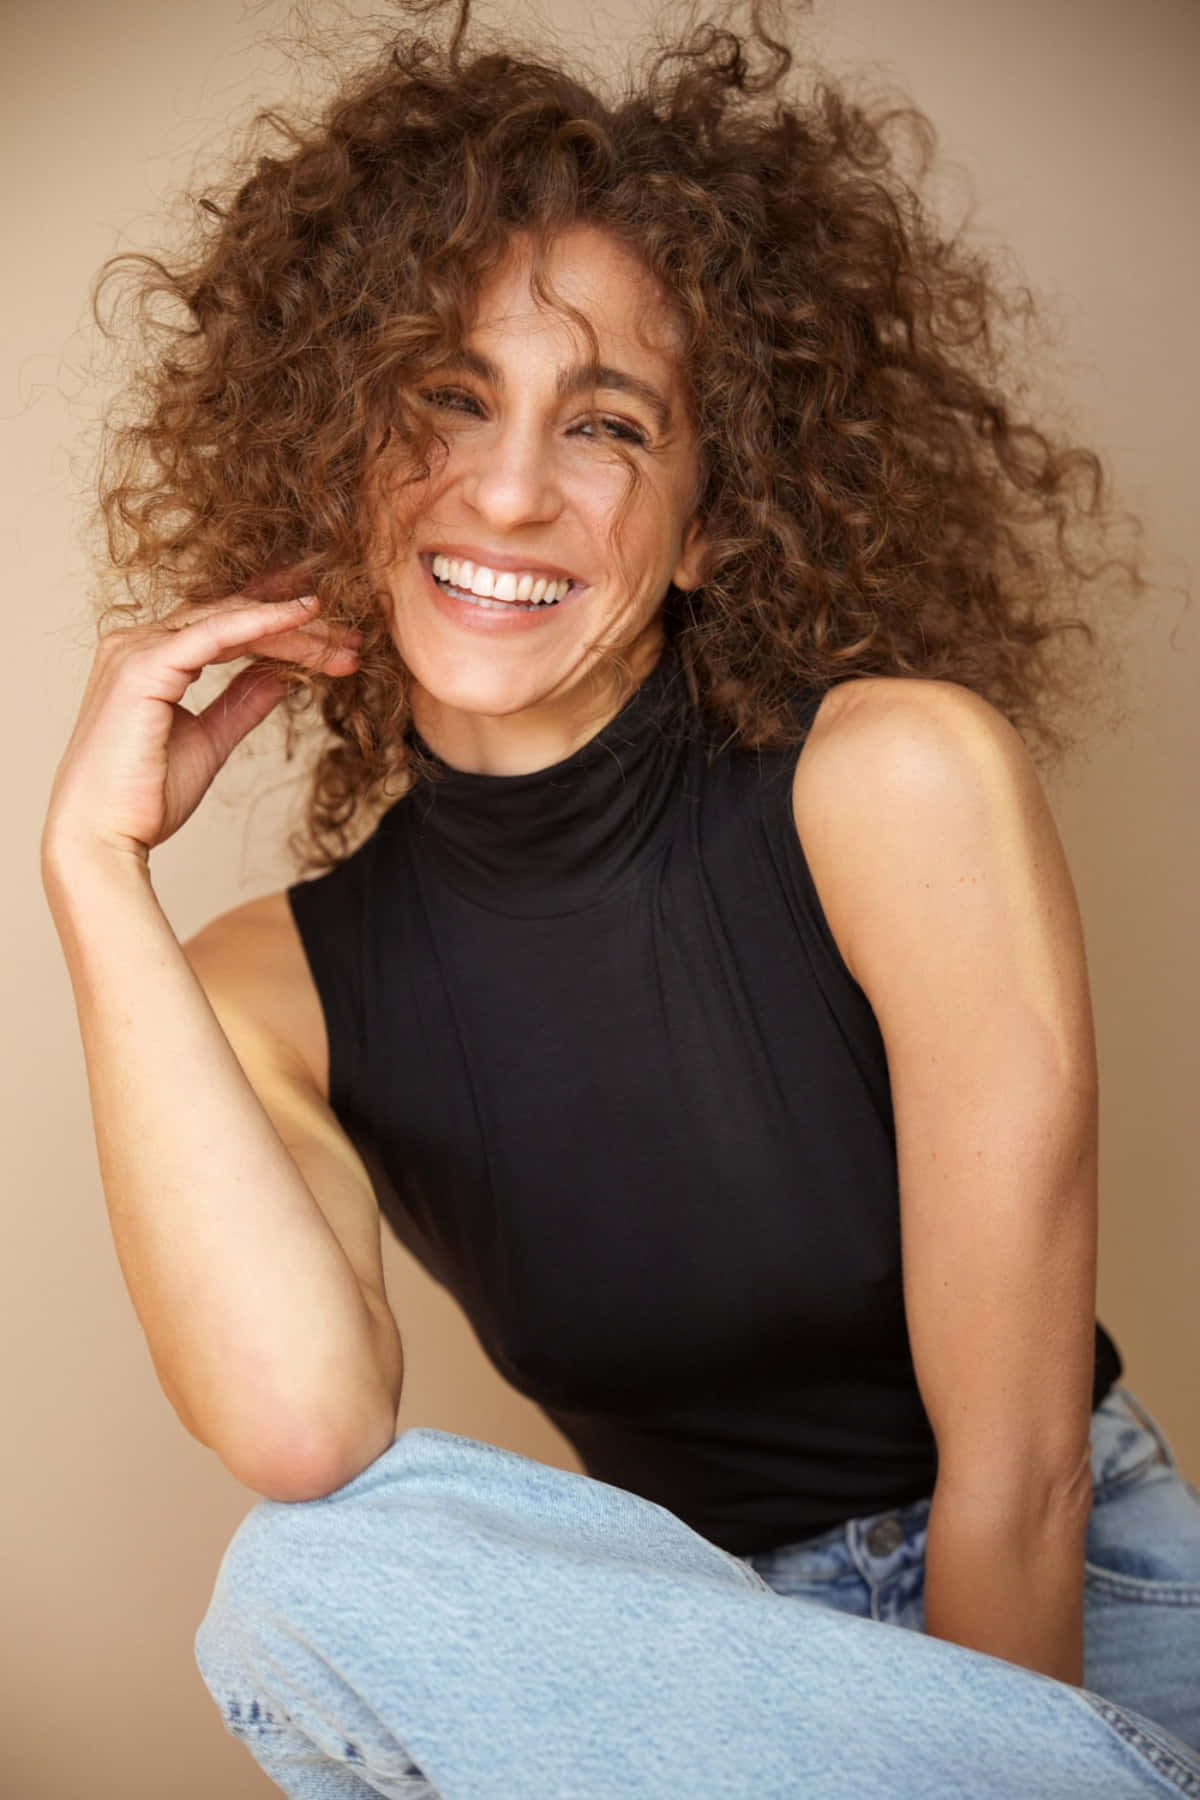 Curly Haired Woman Smiling Casually Wallpaper